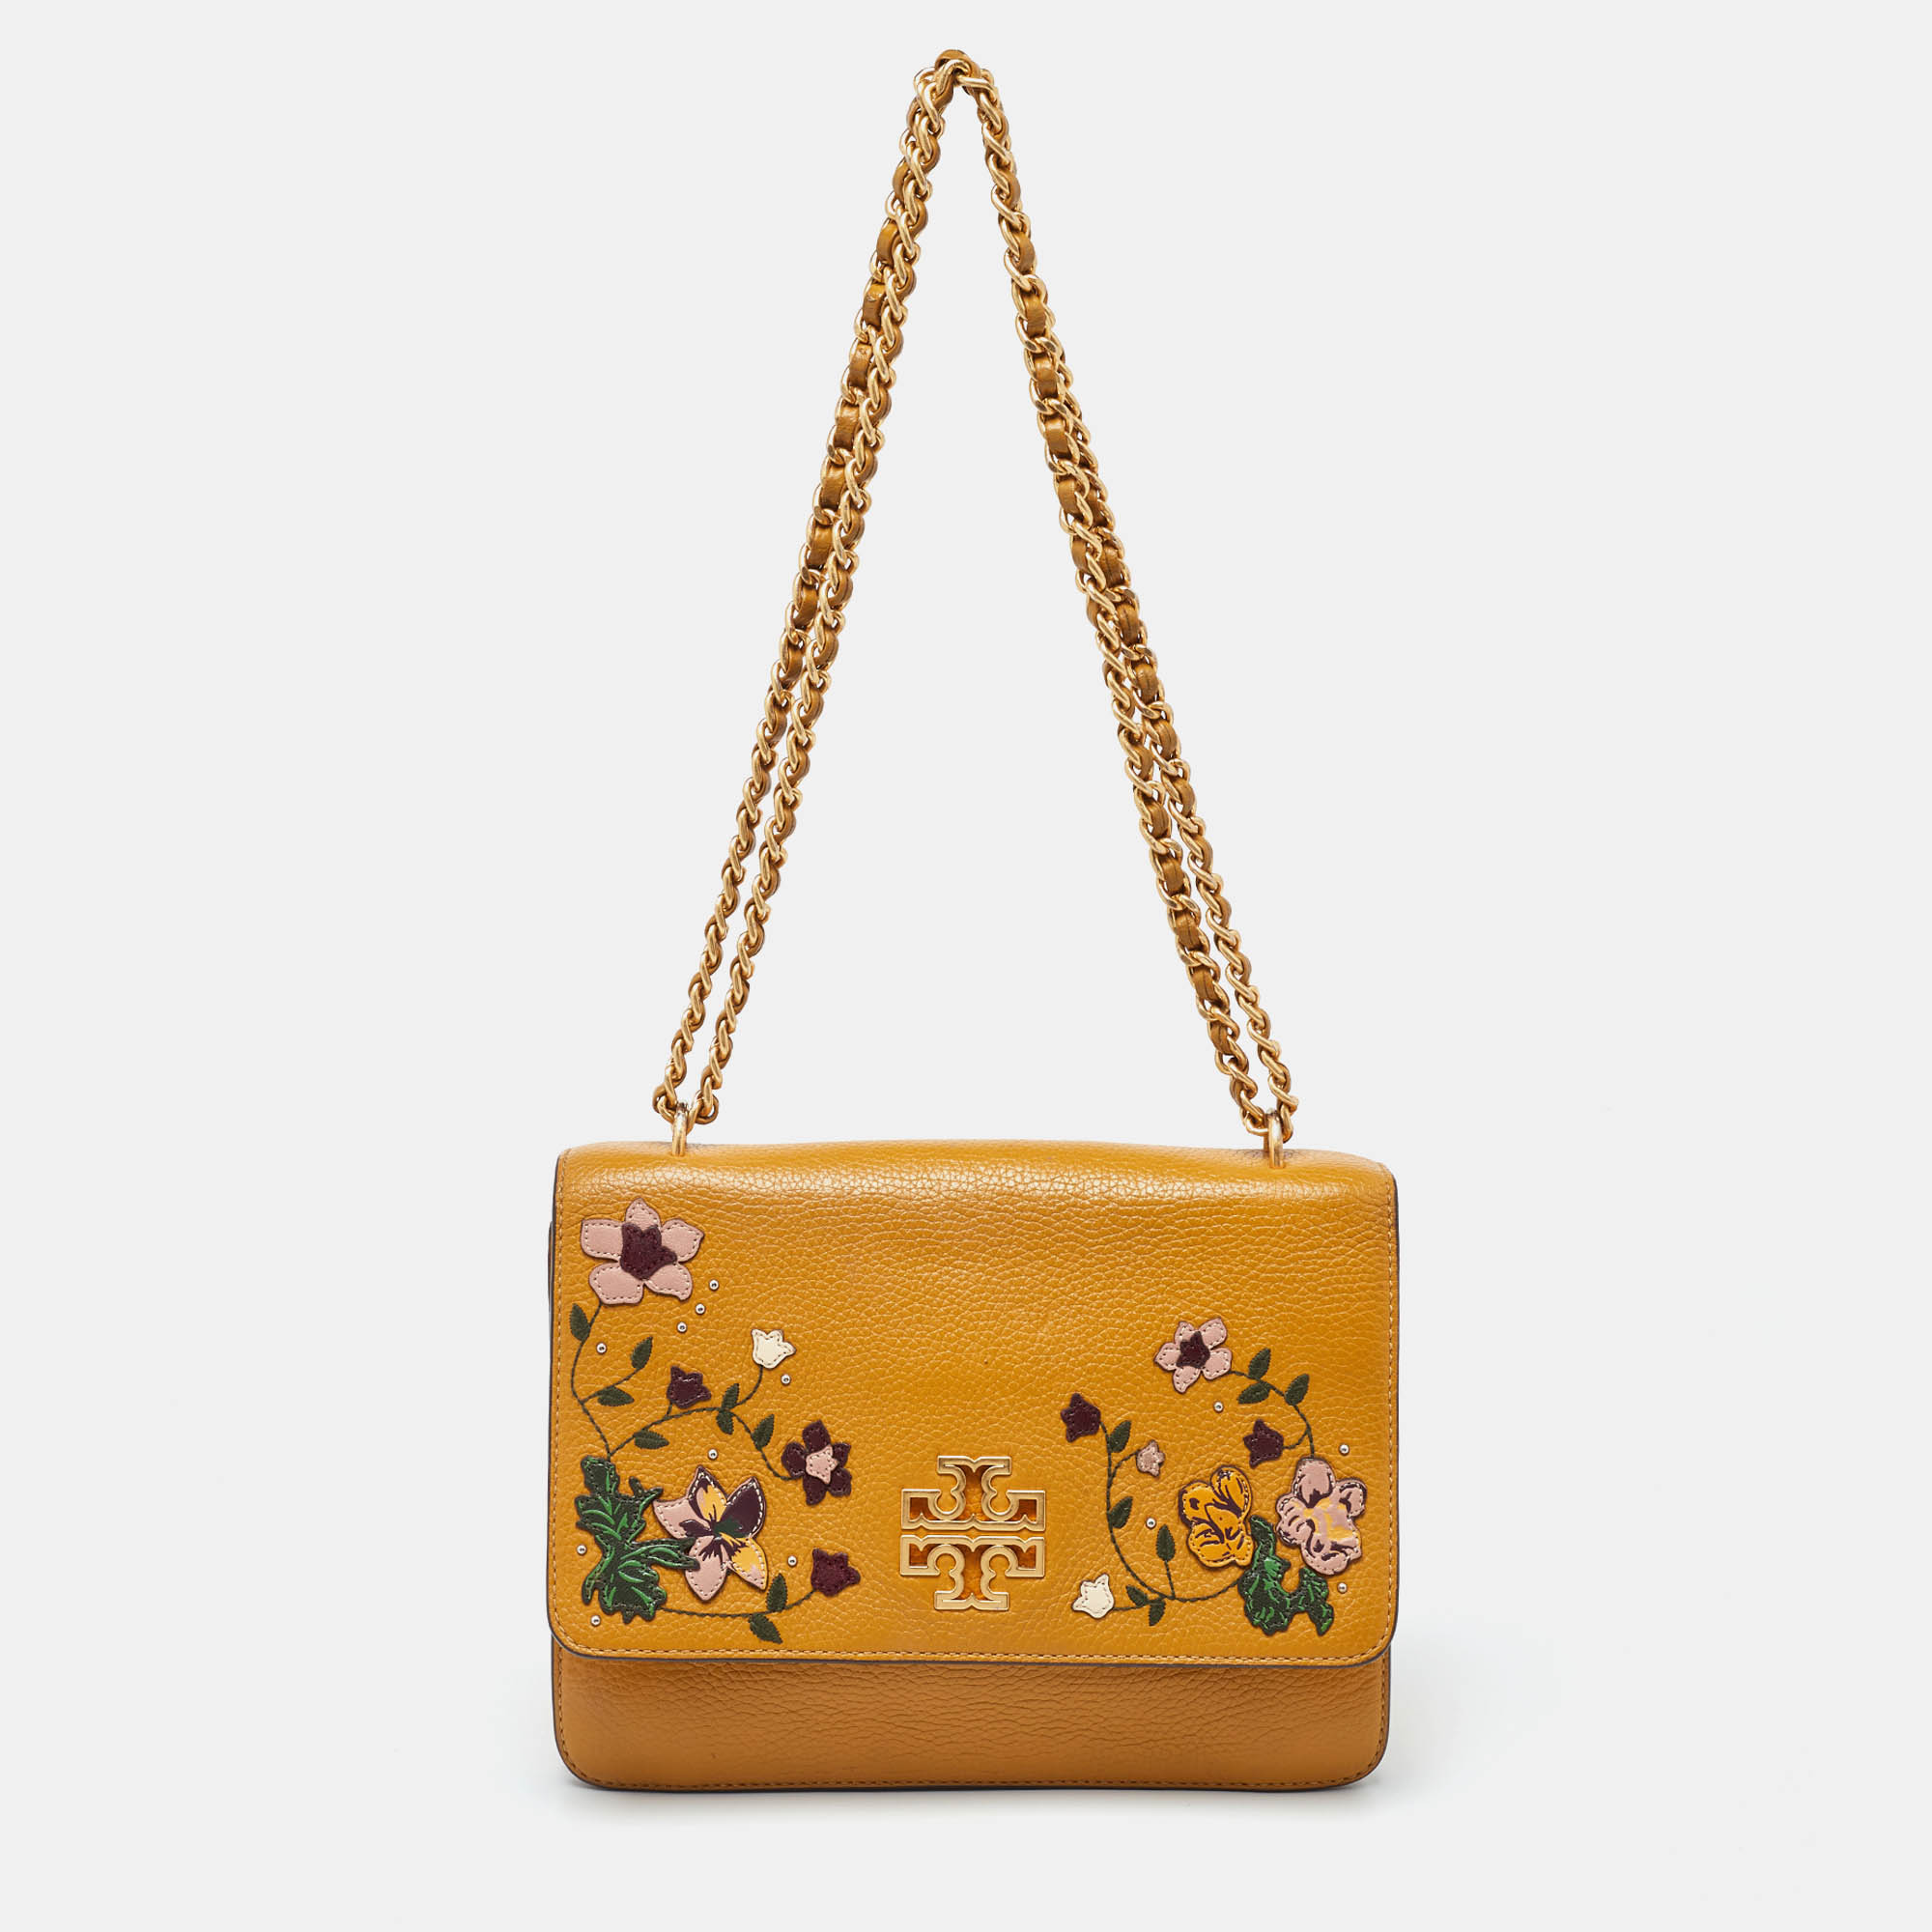 Pre-owned Tory Burch Mustard Leather Britten Floral Applique Flap Bag In Yellow